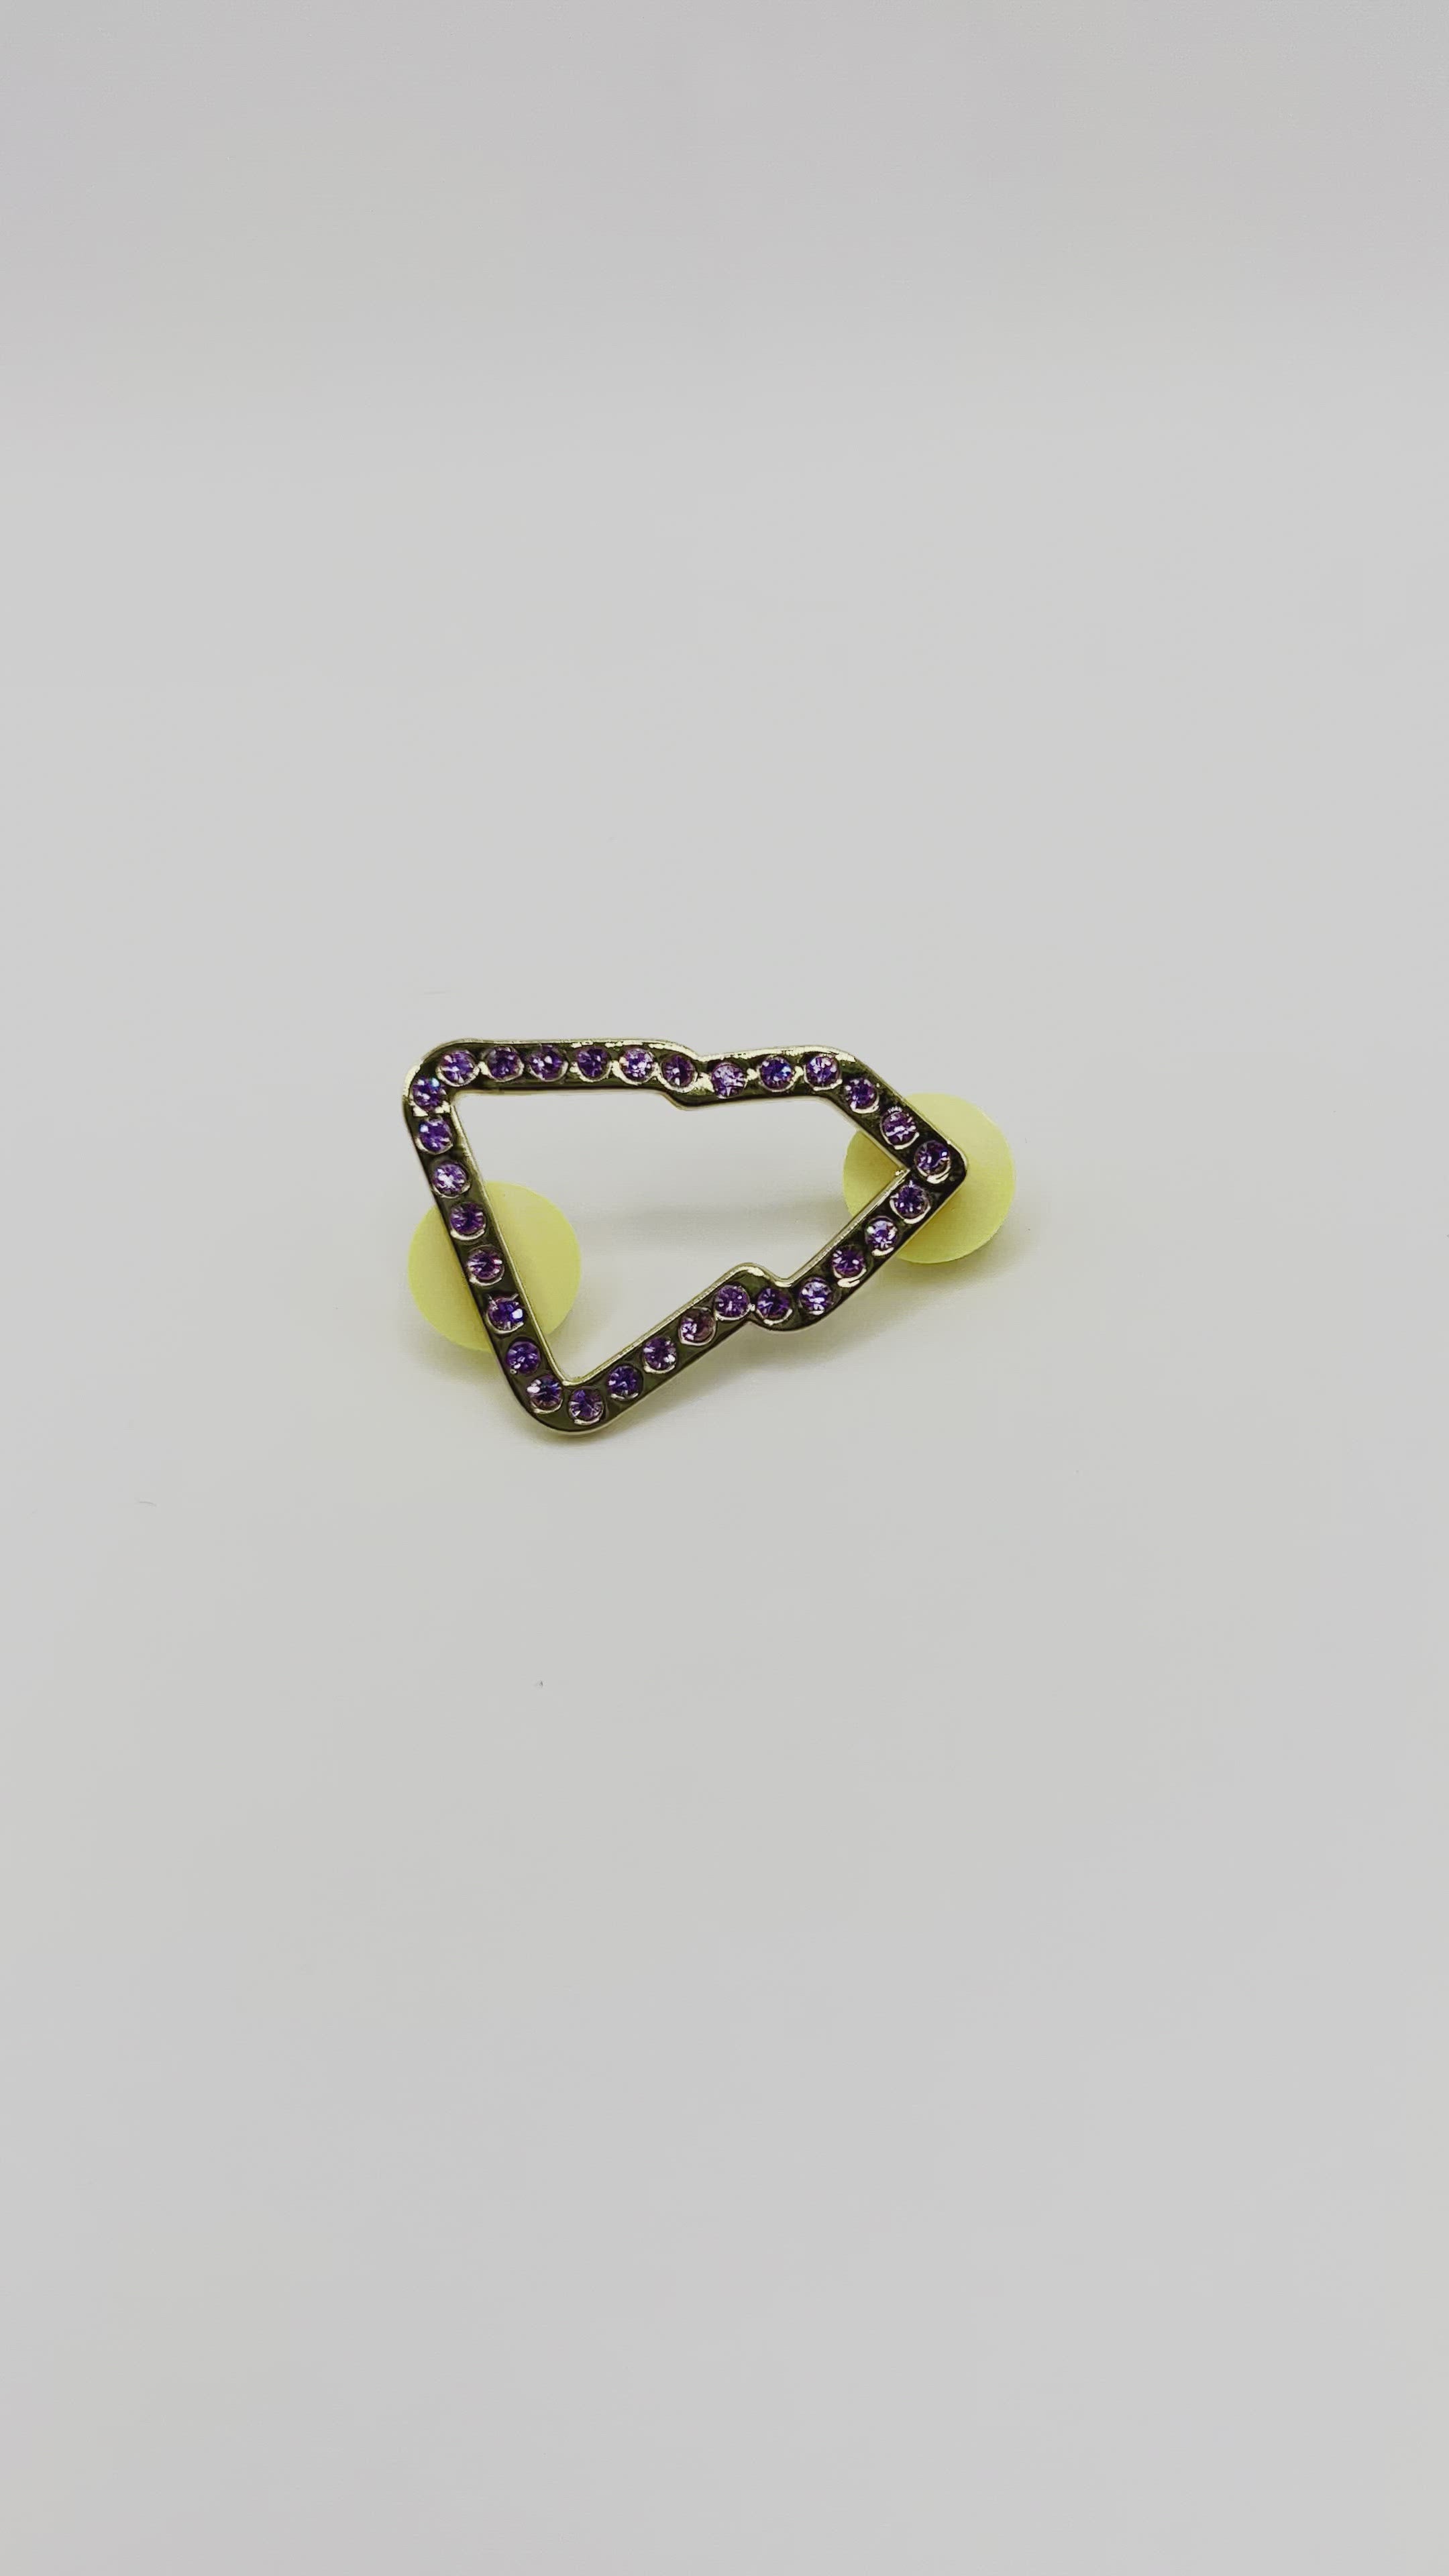 NE Border pin Gold plating with a violet stone